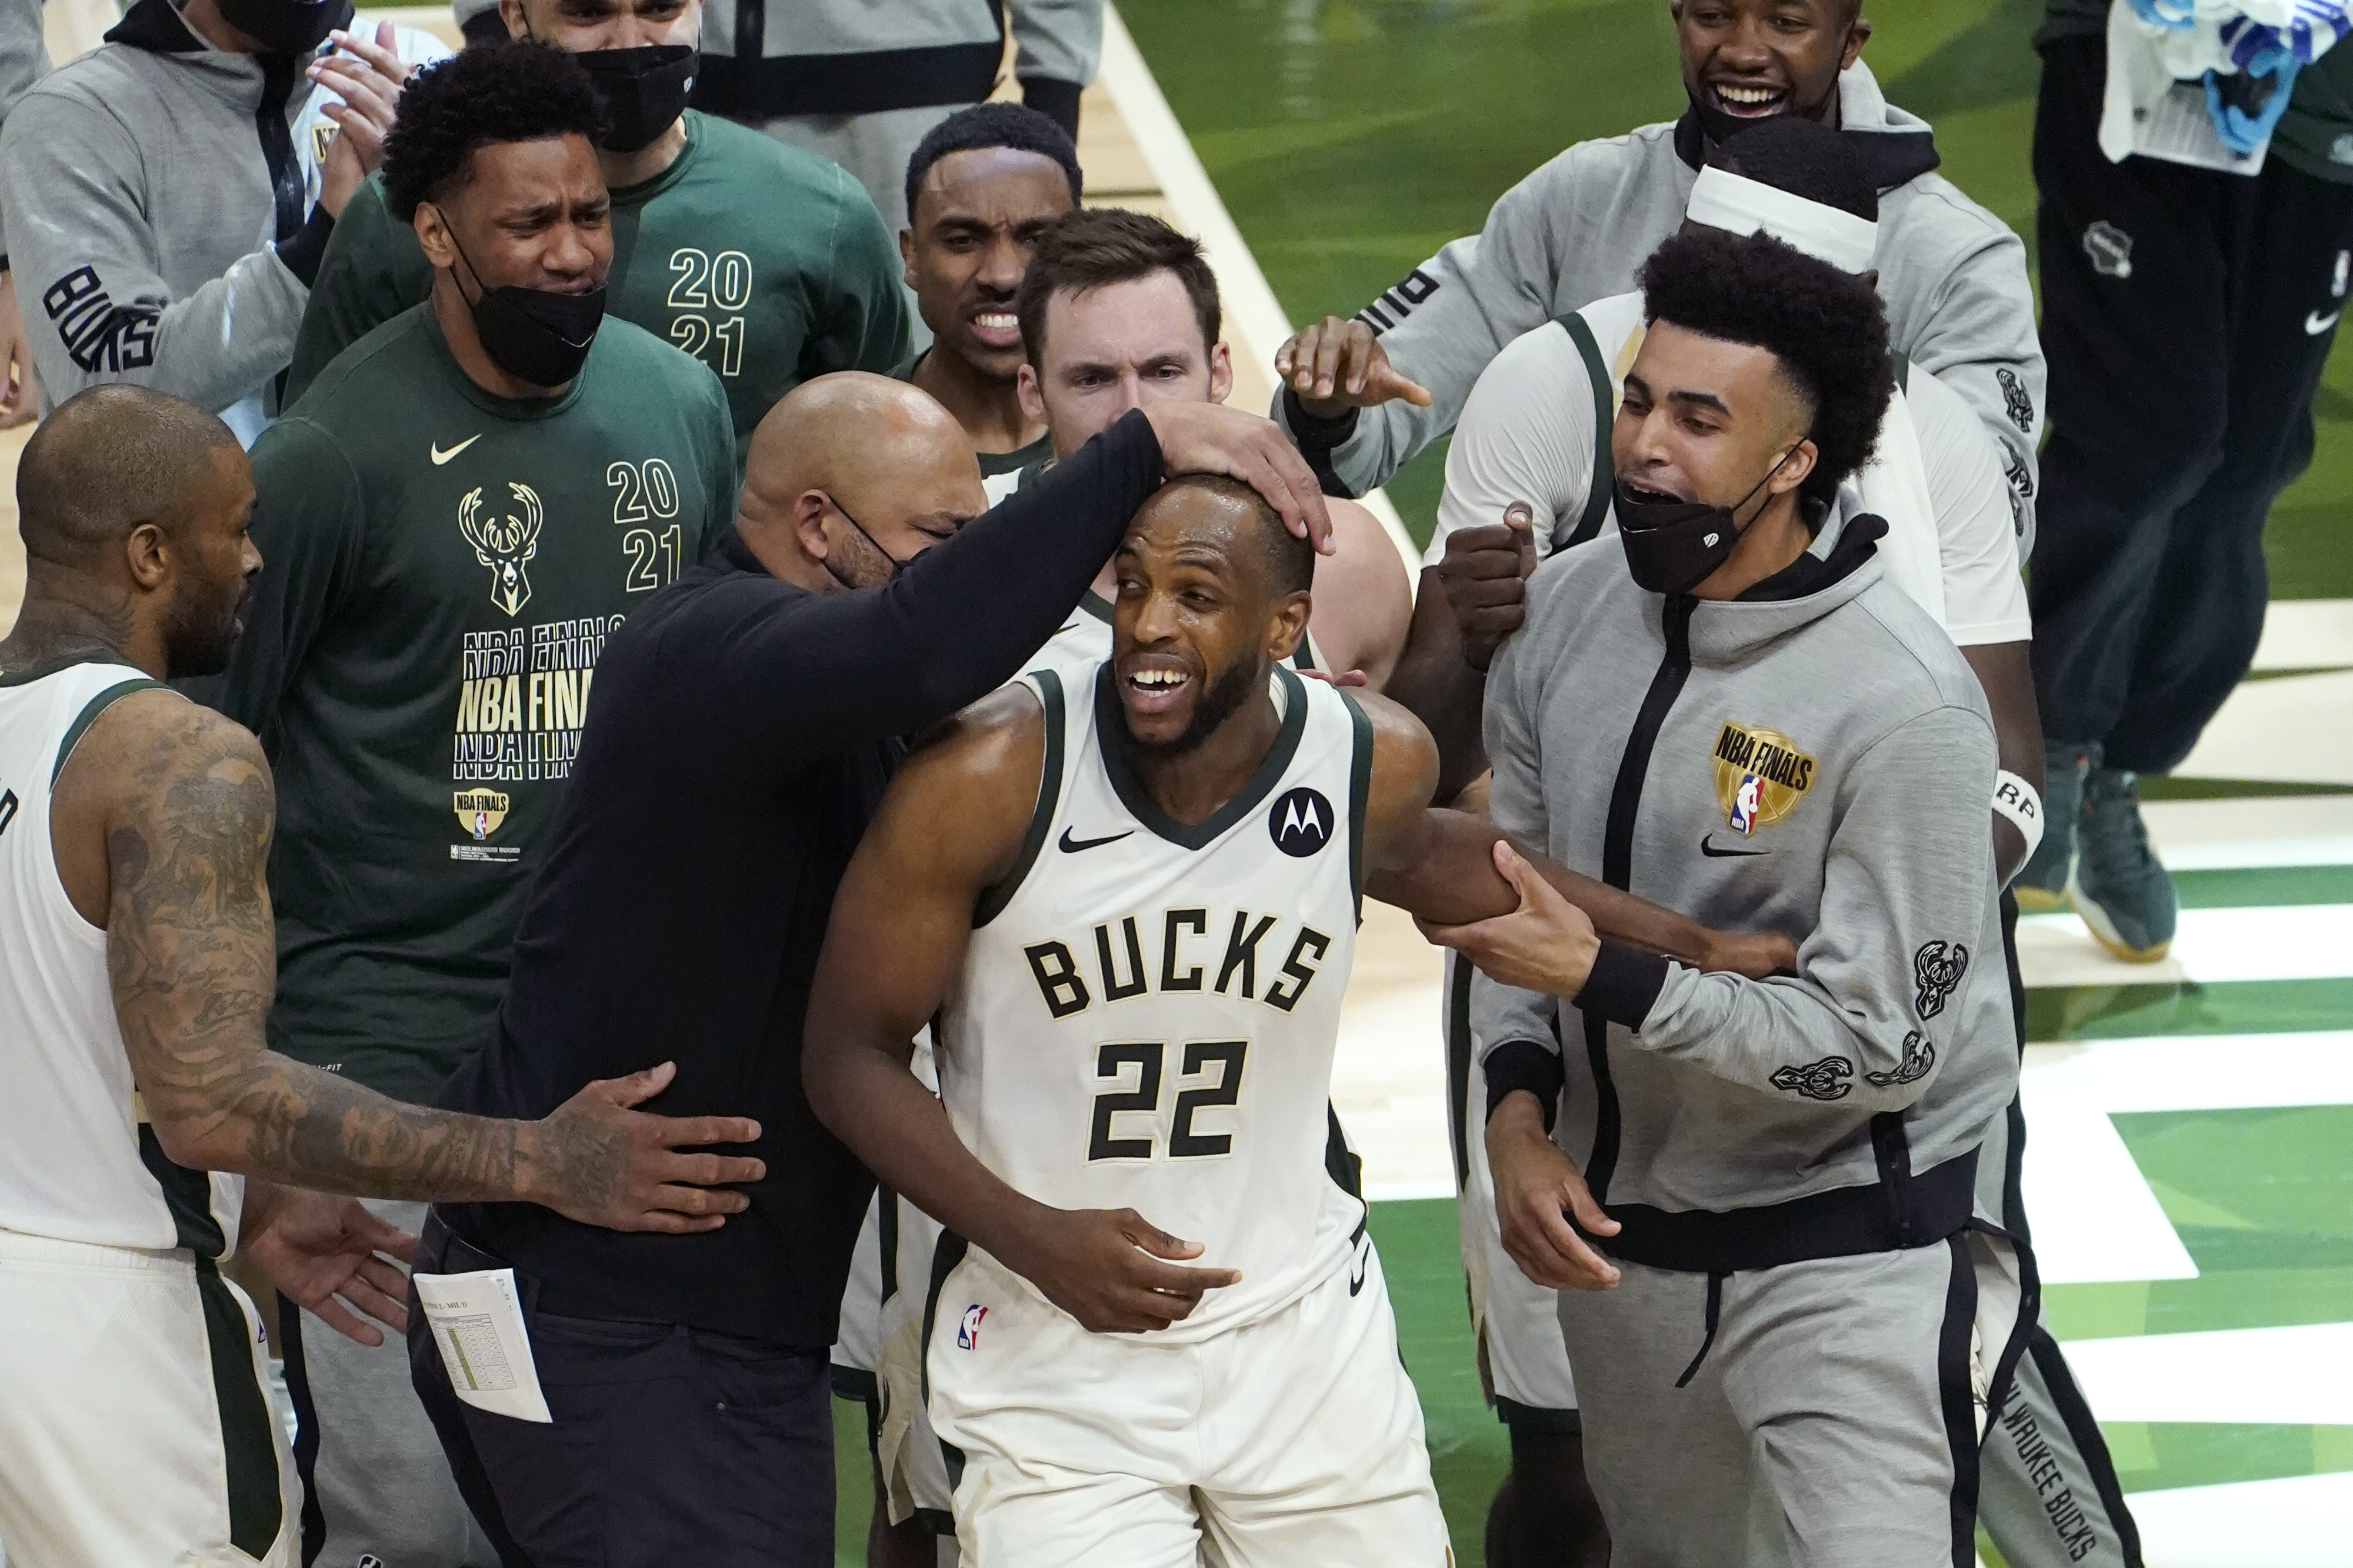 NBA 3-Point Contest 2019: Khris Middleton competes in star-studded